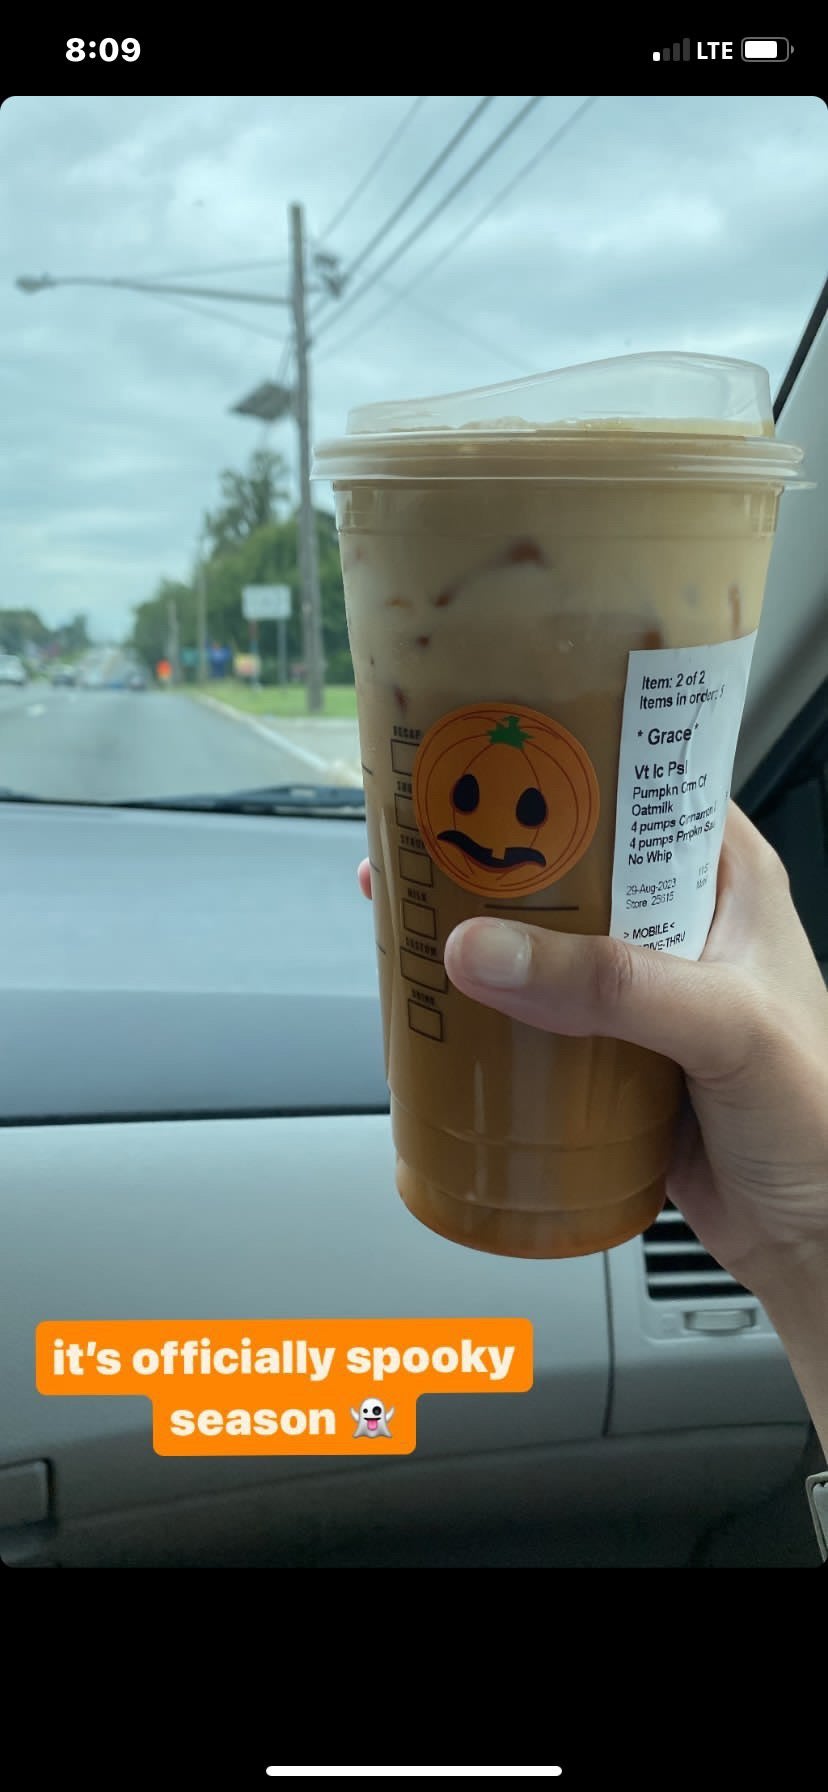 A Starbucks drink being held in a car